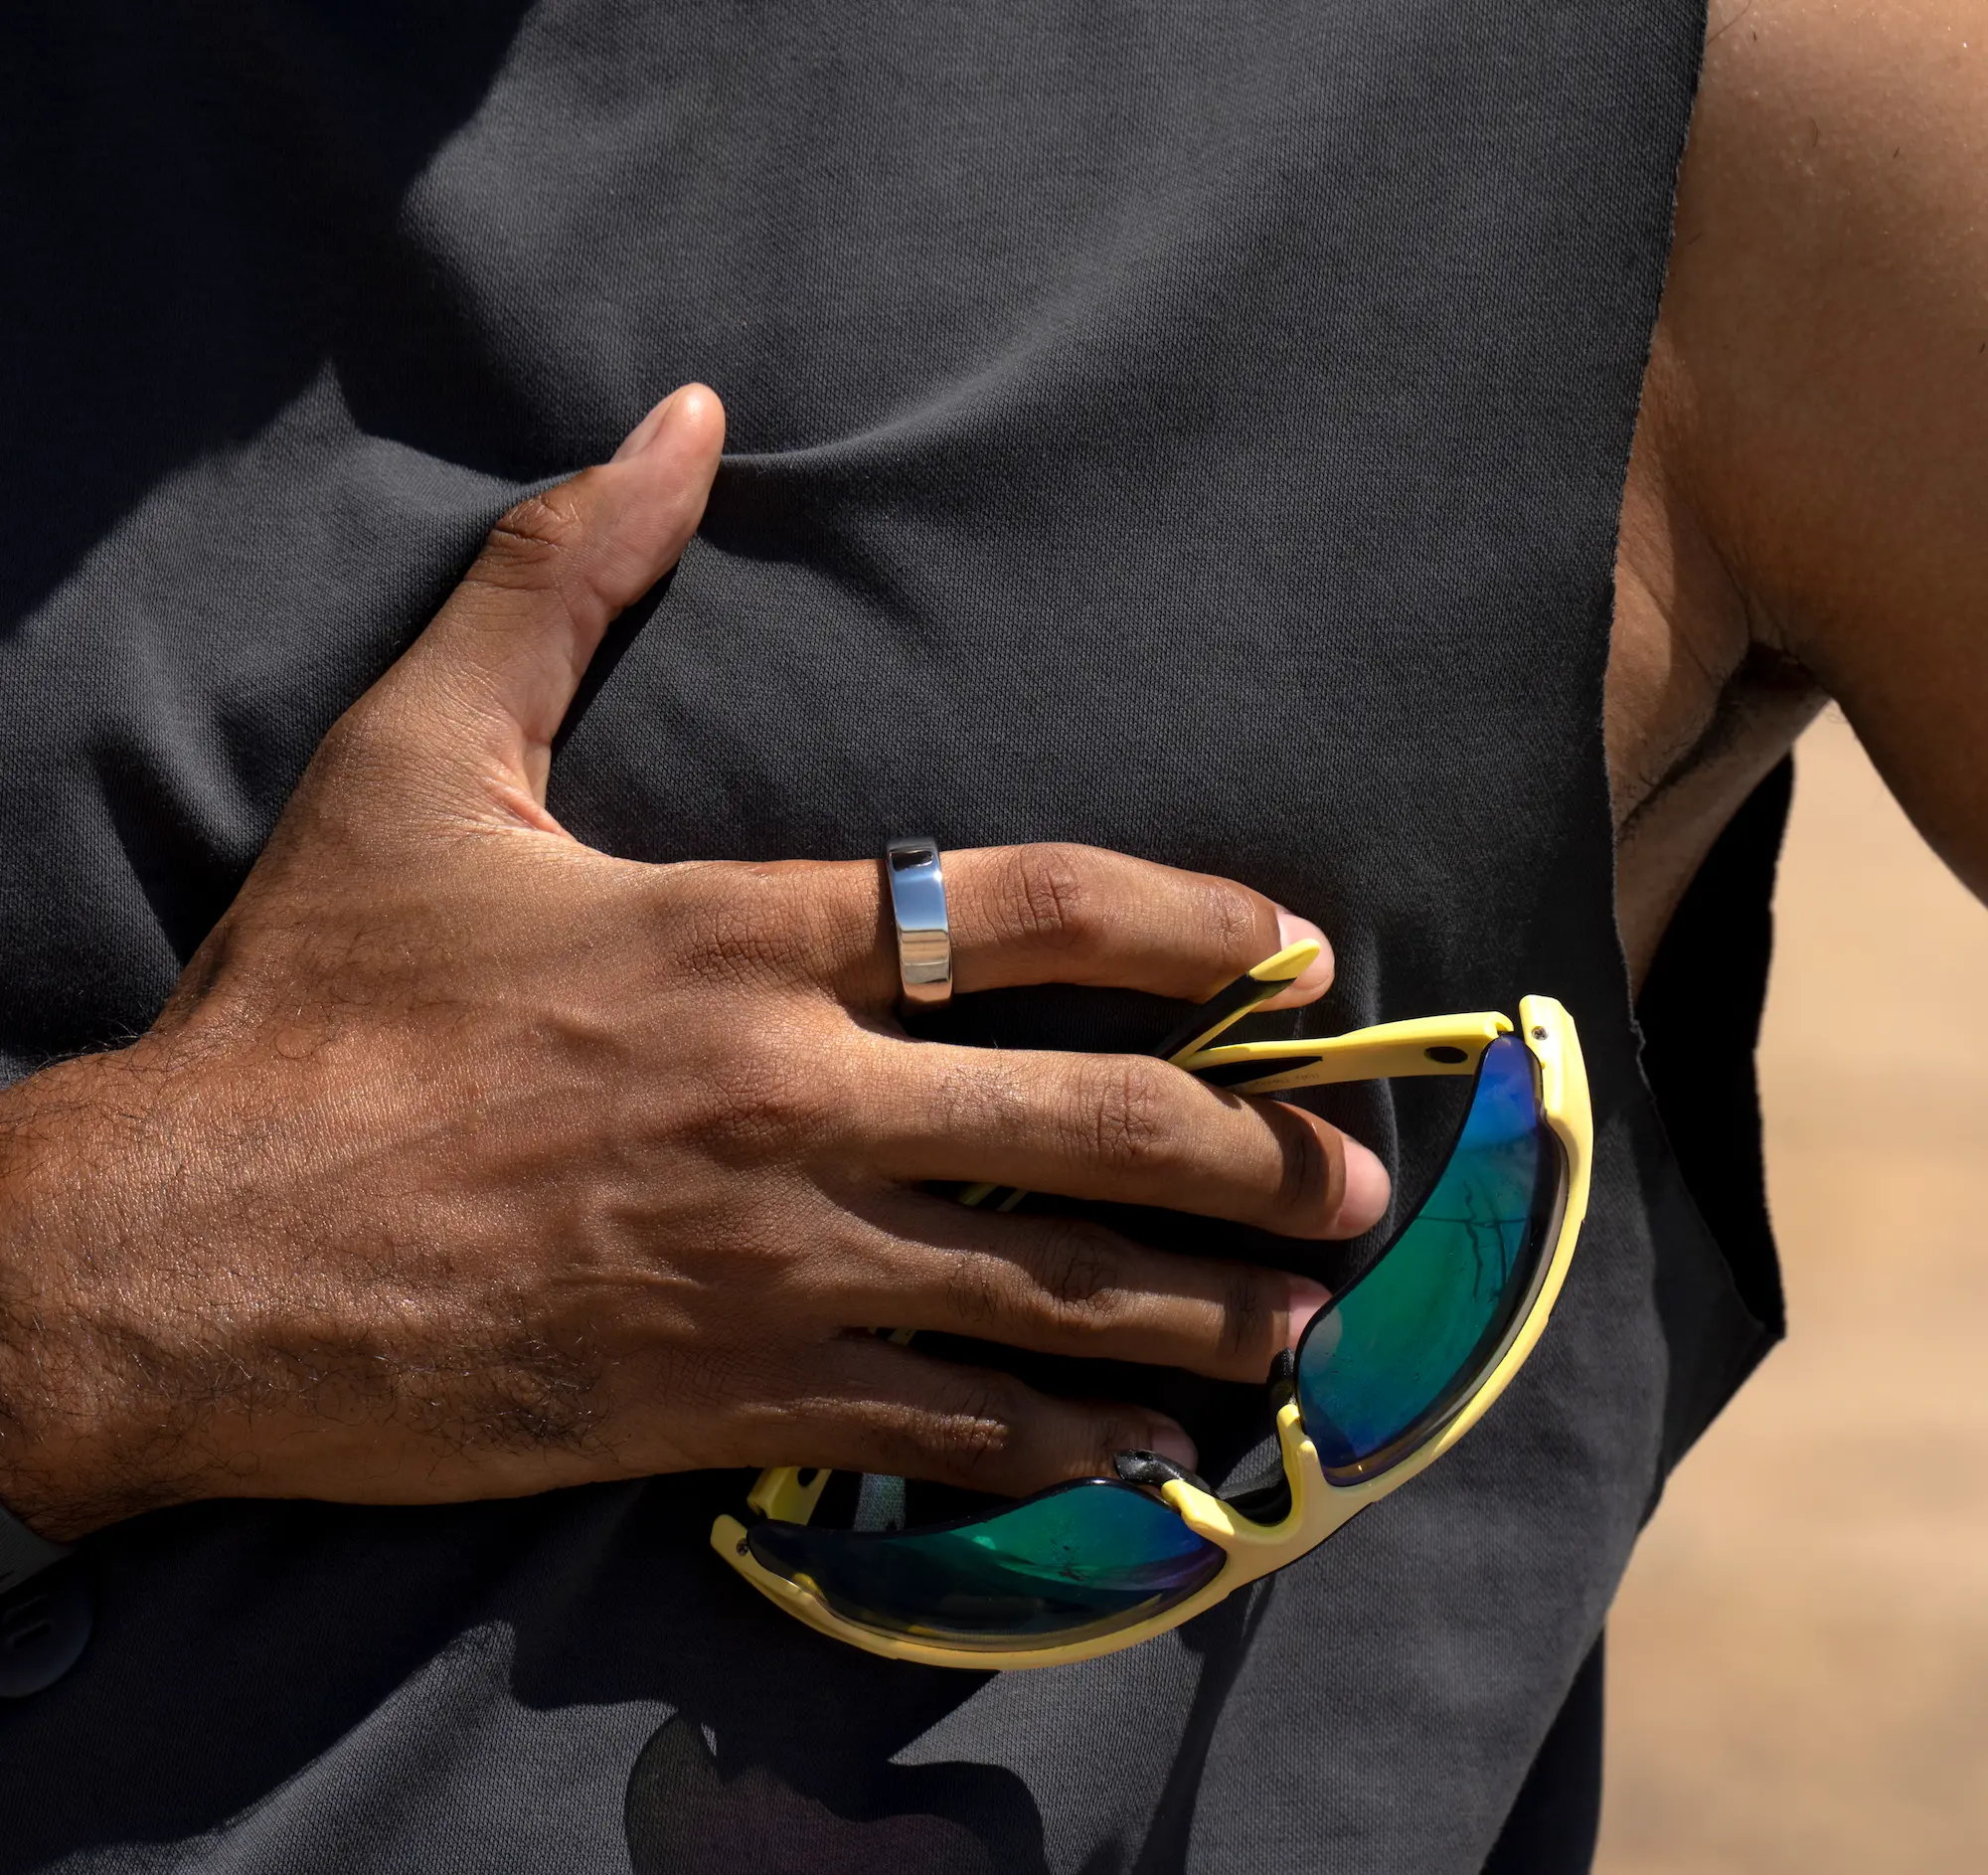 Product of the Week: Is Oura Ring Worth the Hype? - Athletech News